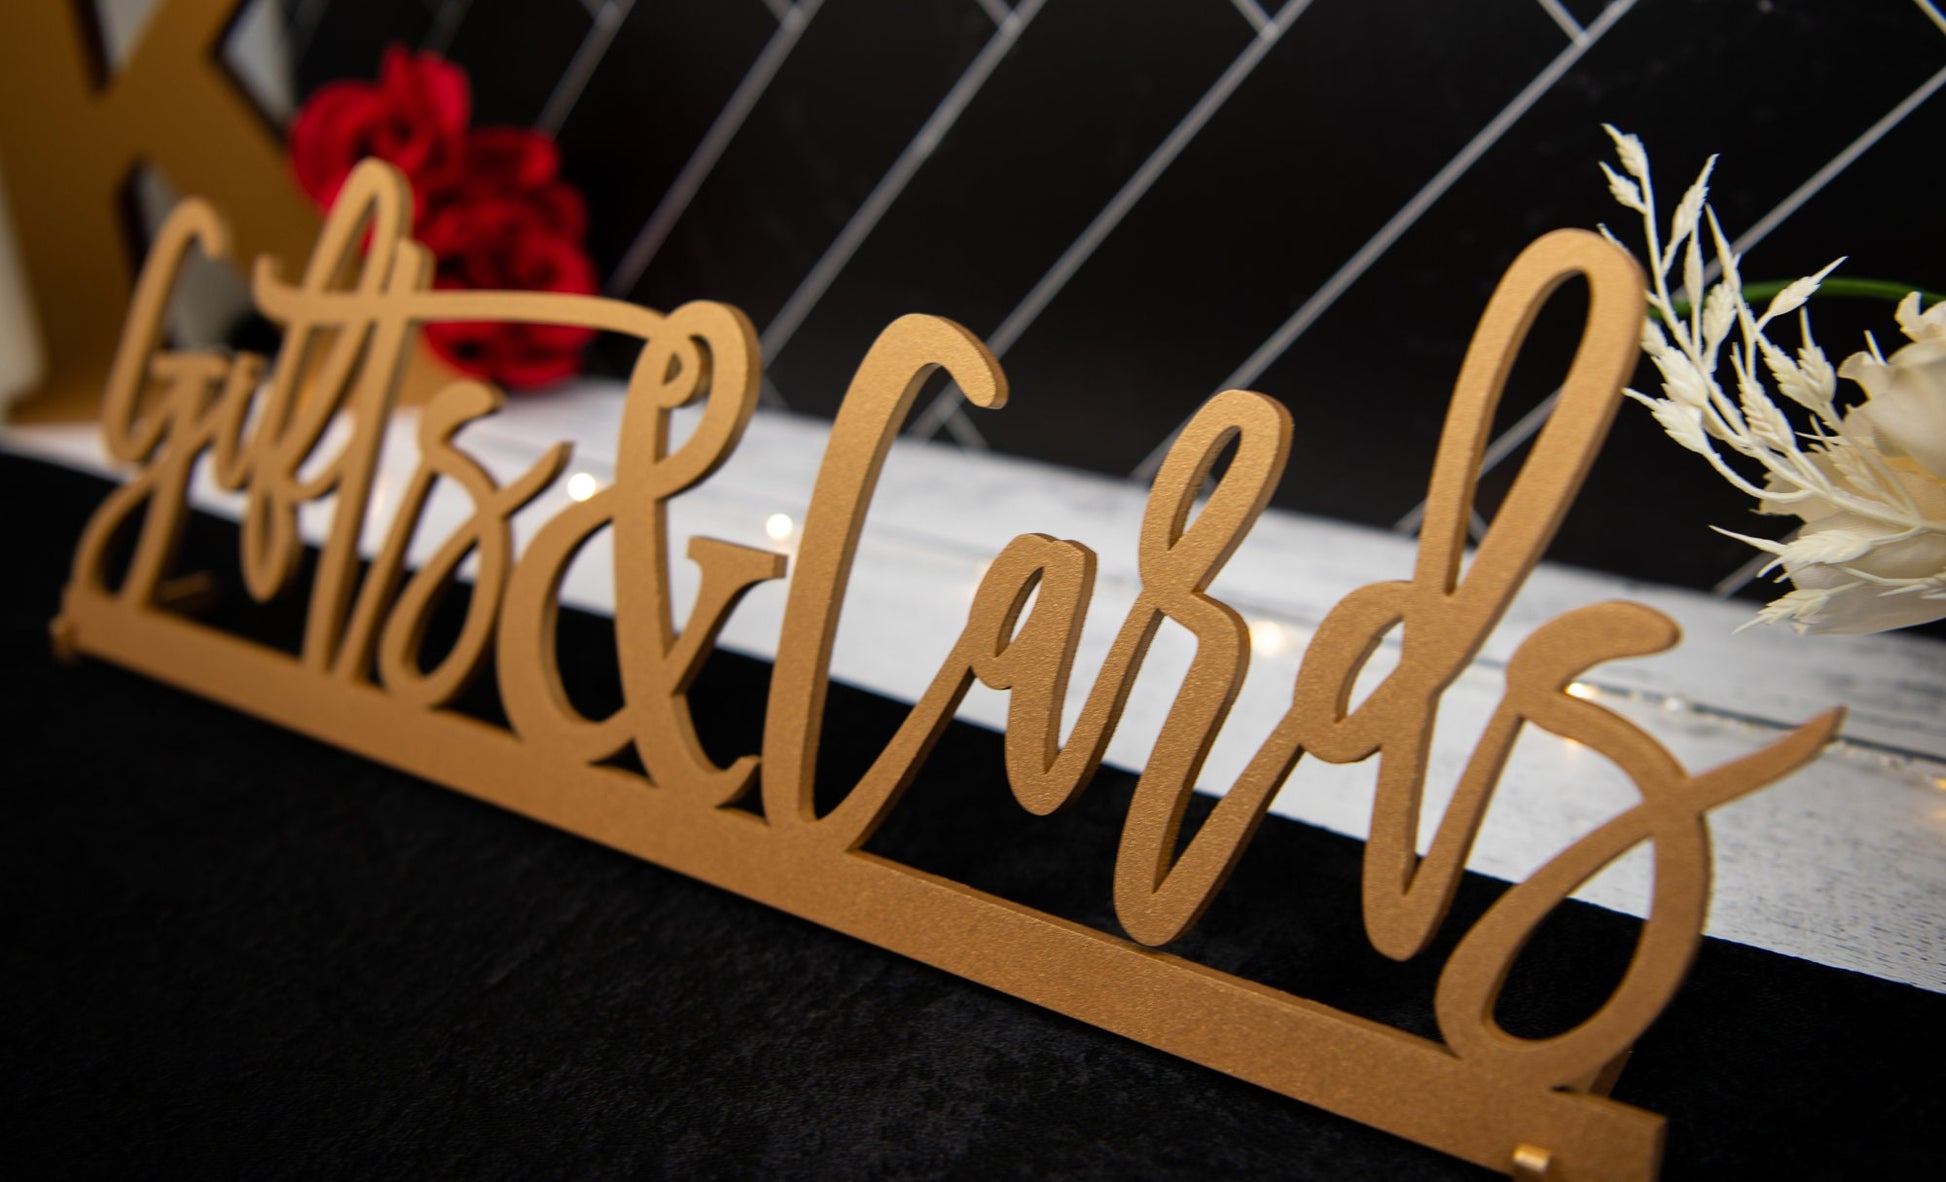 Gifts & cards sign. Script Gifts and cards sign. Gift Sign. Card Sign. Gift table sign. Wedding signs. Wood Gift and card sign, Grad Sign